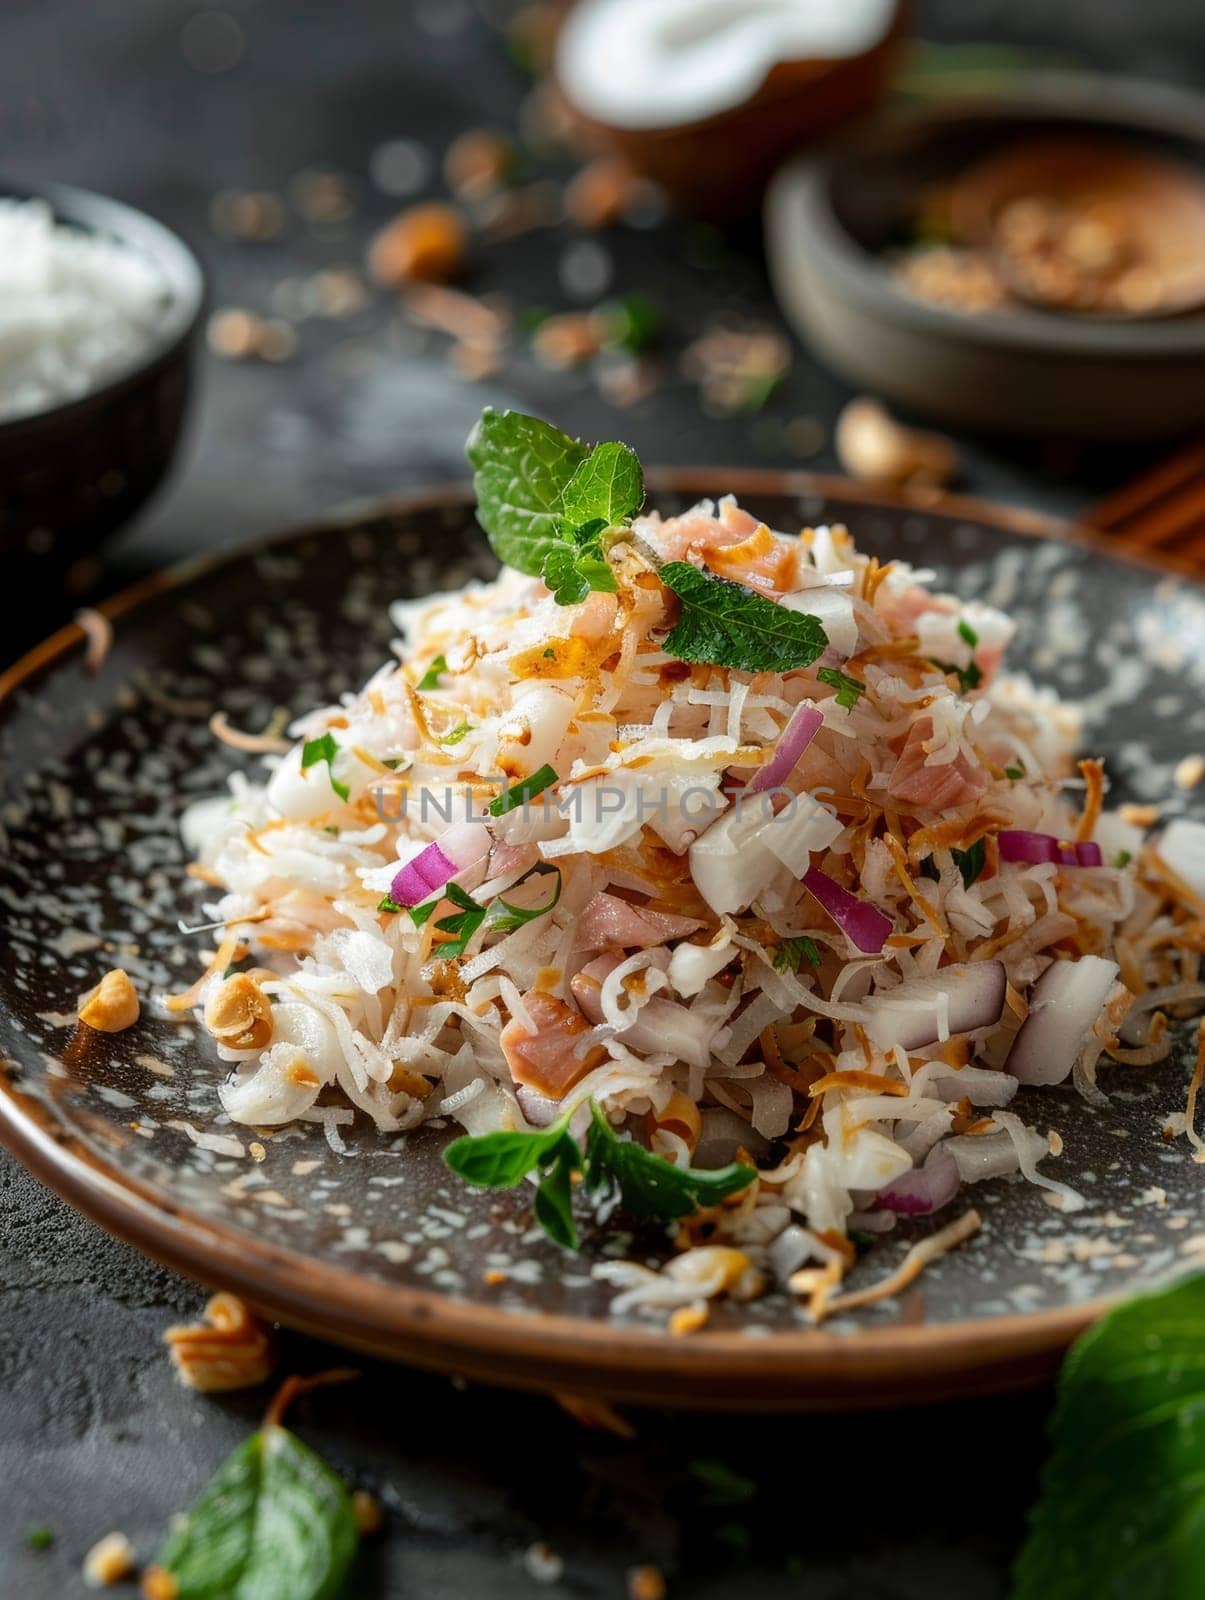 Maldivian mas huni, a traditional dish featuring shredded smoked tuna mixed with fresh coconut and onions, served on a small plate. Simple, yet flavorful meal represents the coastal, island cuisine. by sfinks